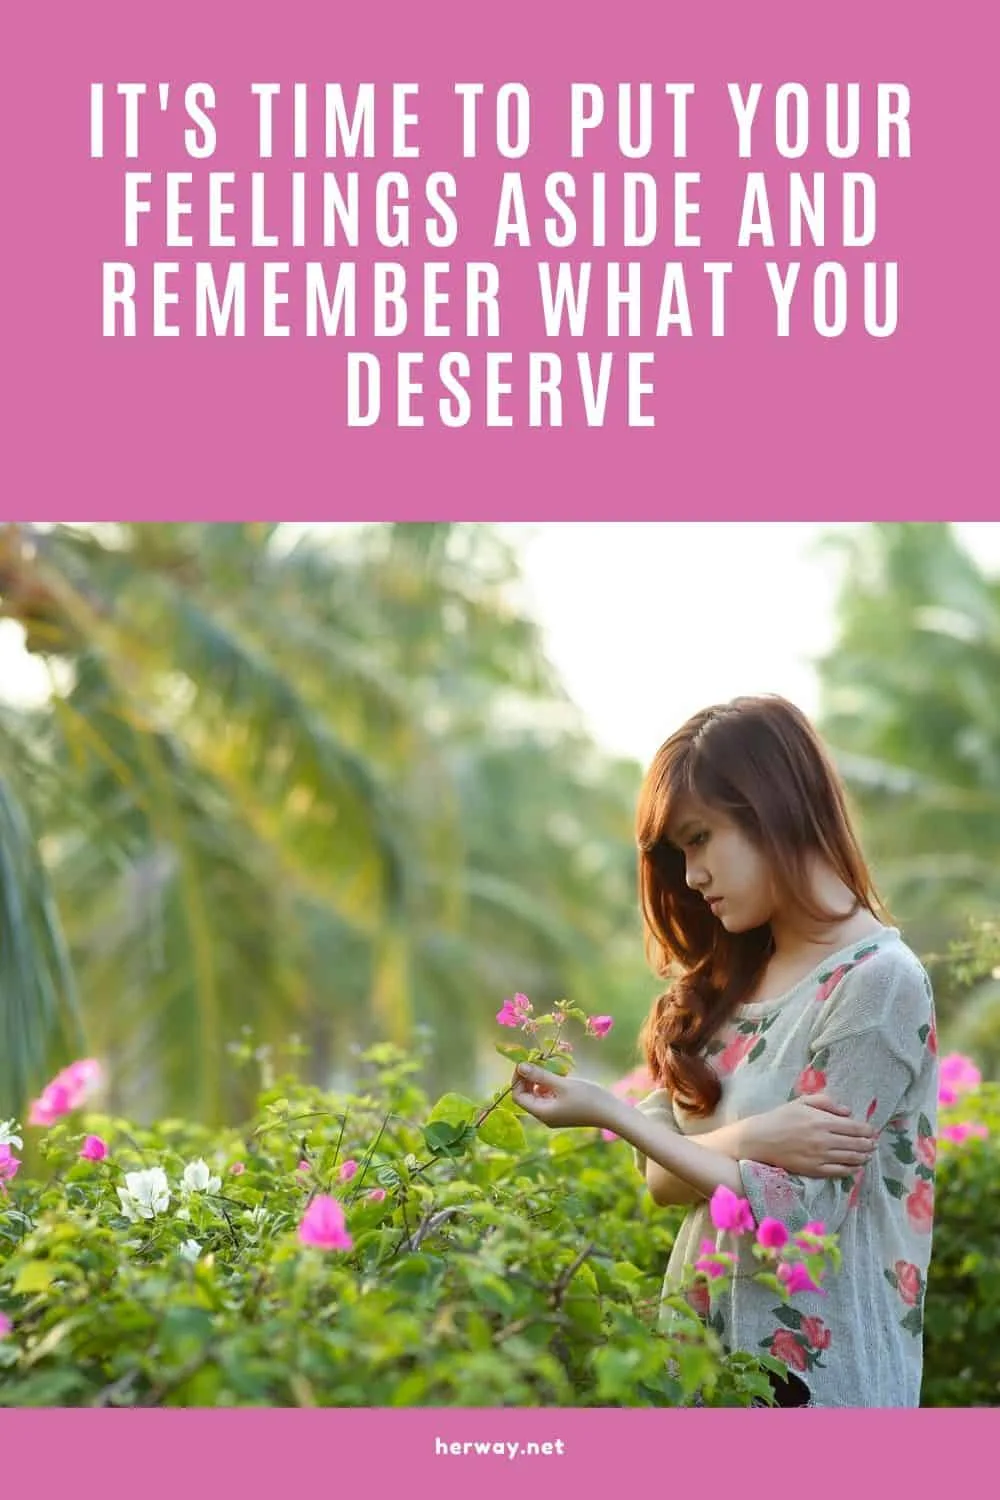 It's Time To Put Your Feelings Aside And Remember What You Deserve